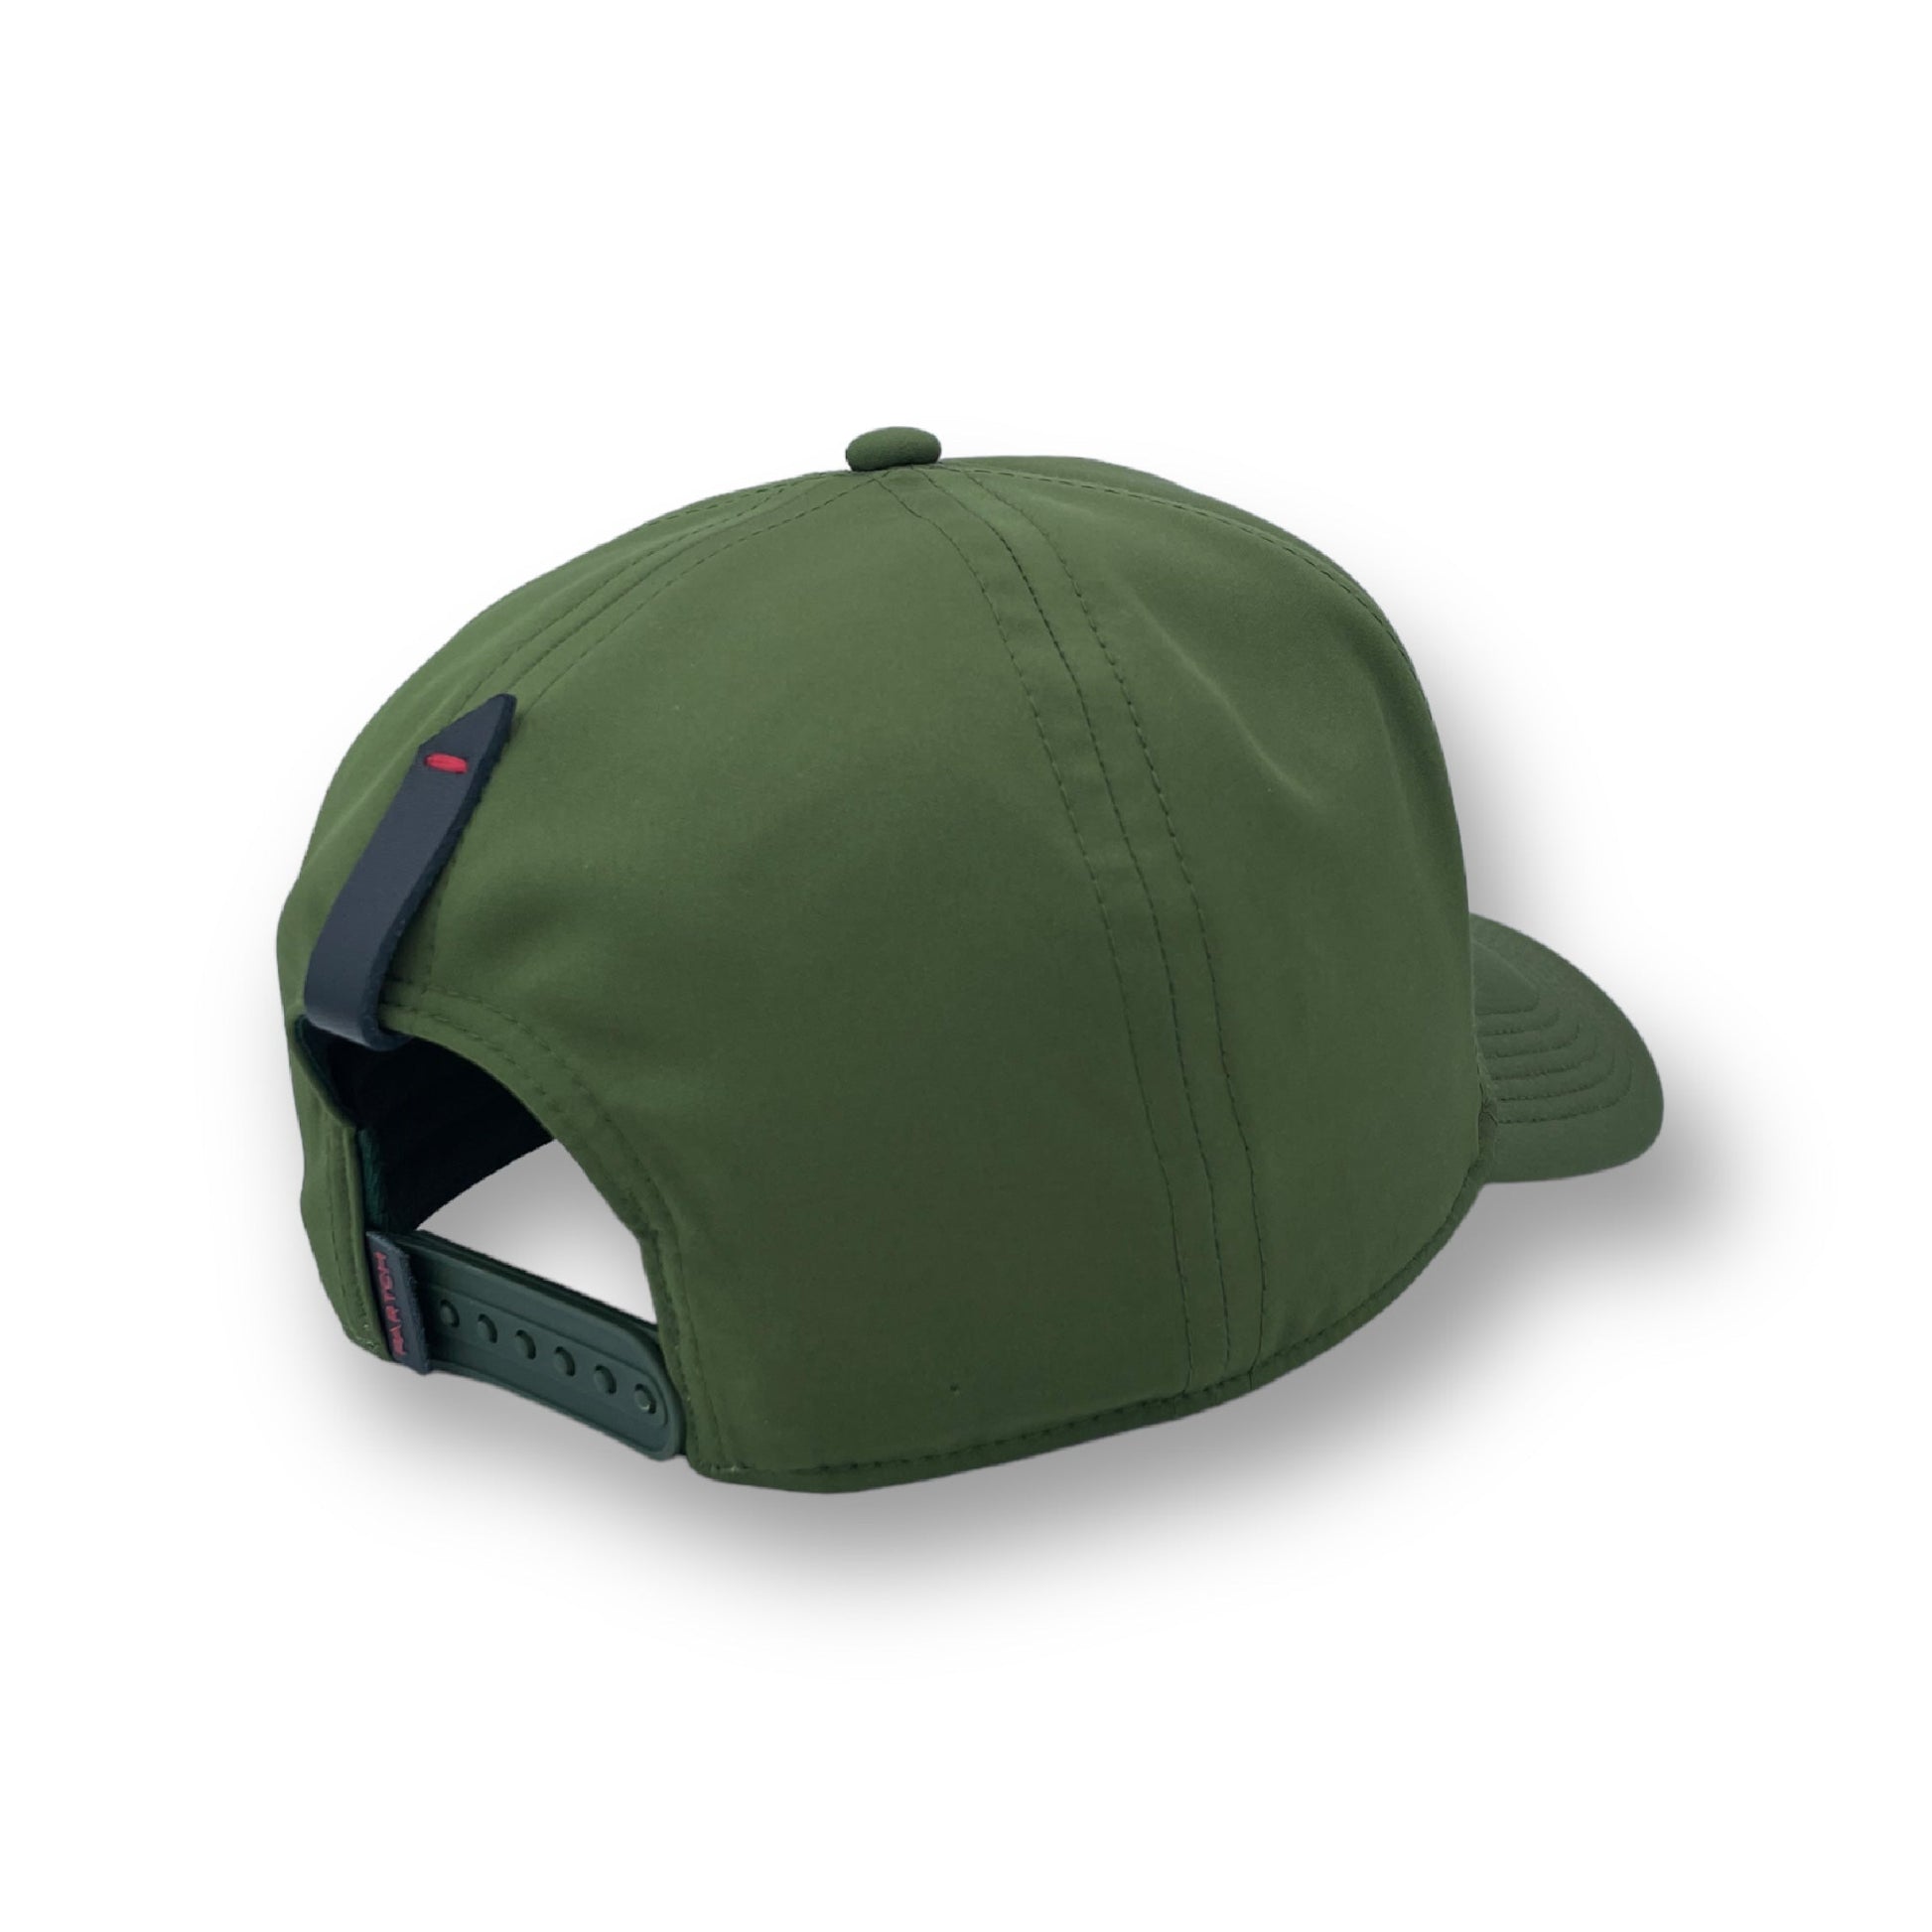 PARTCH trucker cap in green full fabric and leather accents